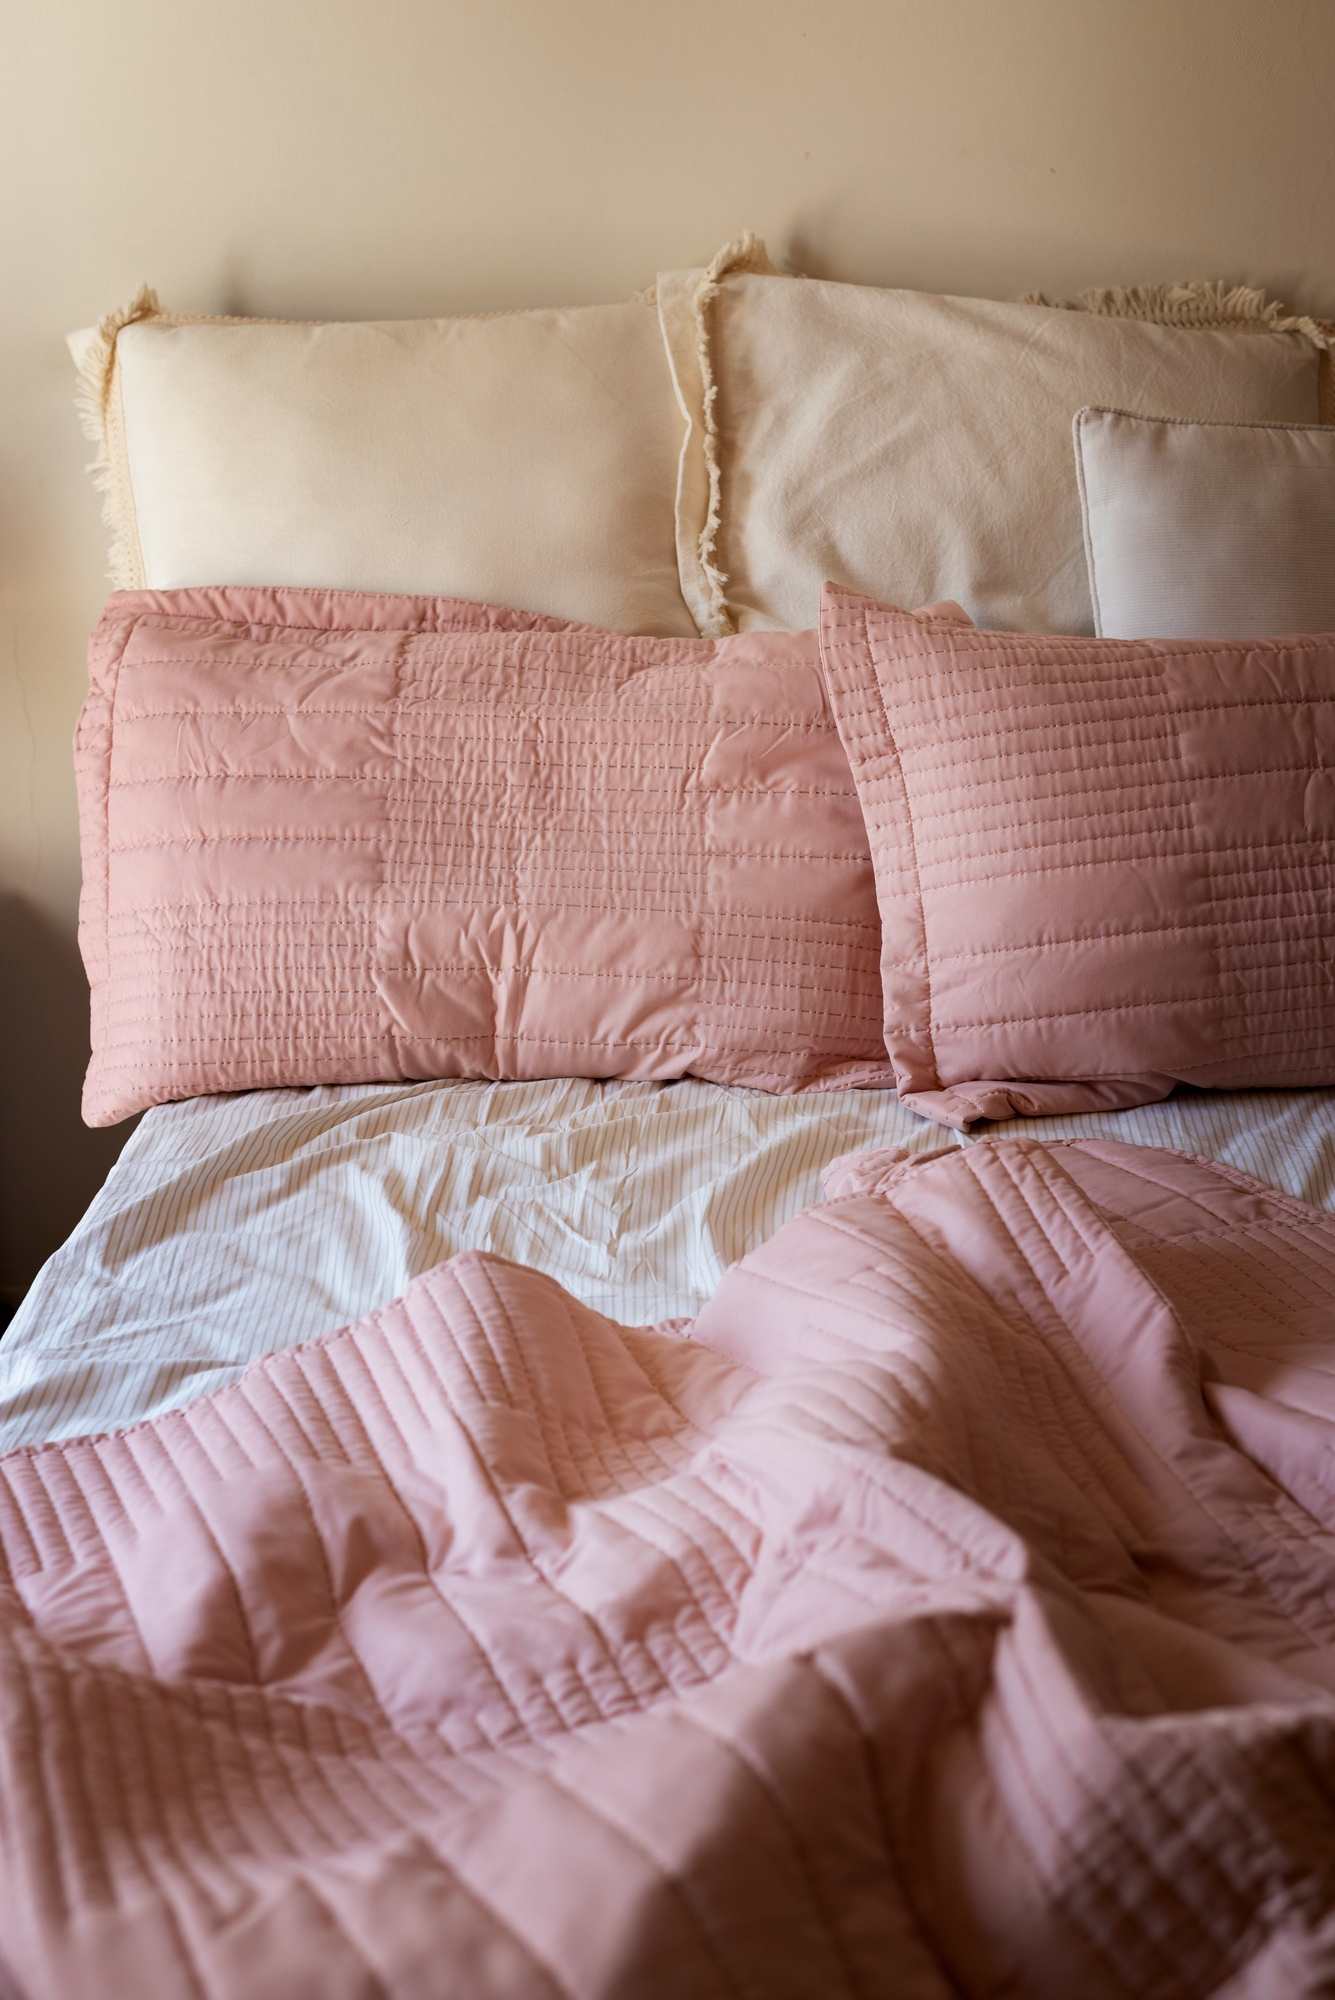 Quilt vs Comforters: Which is Right for You?